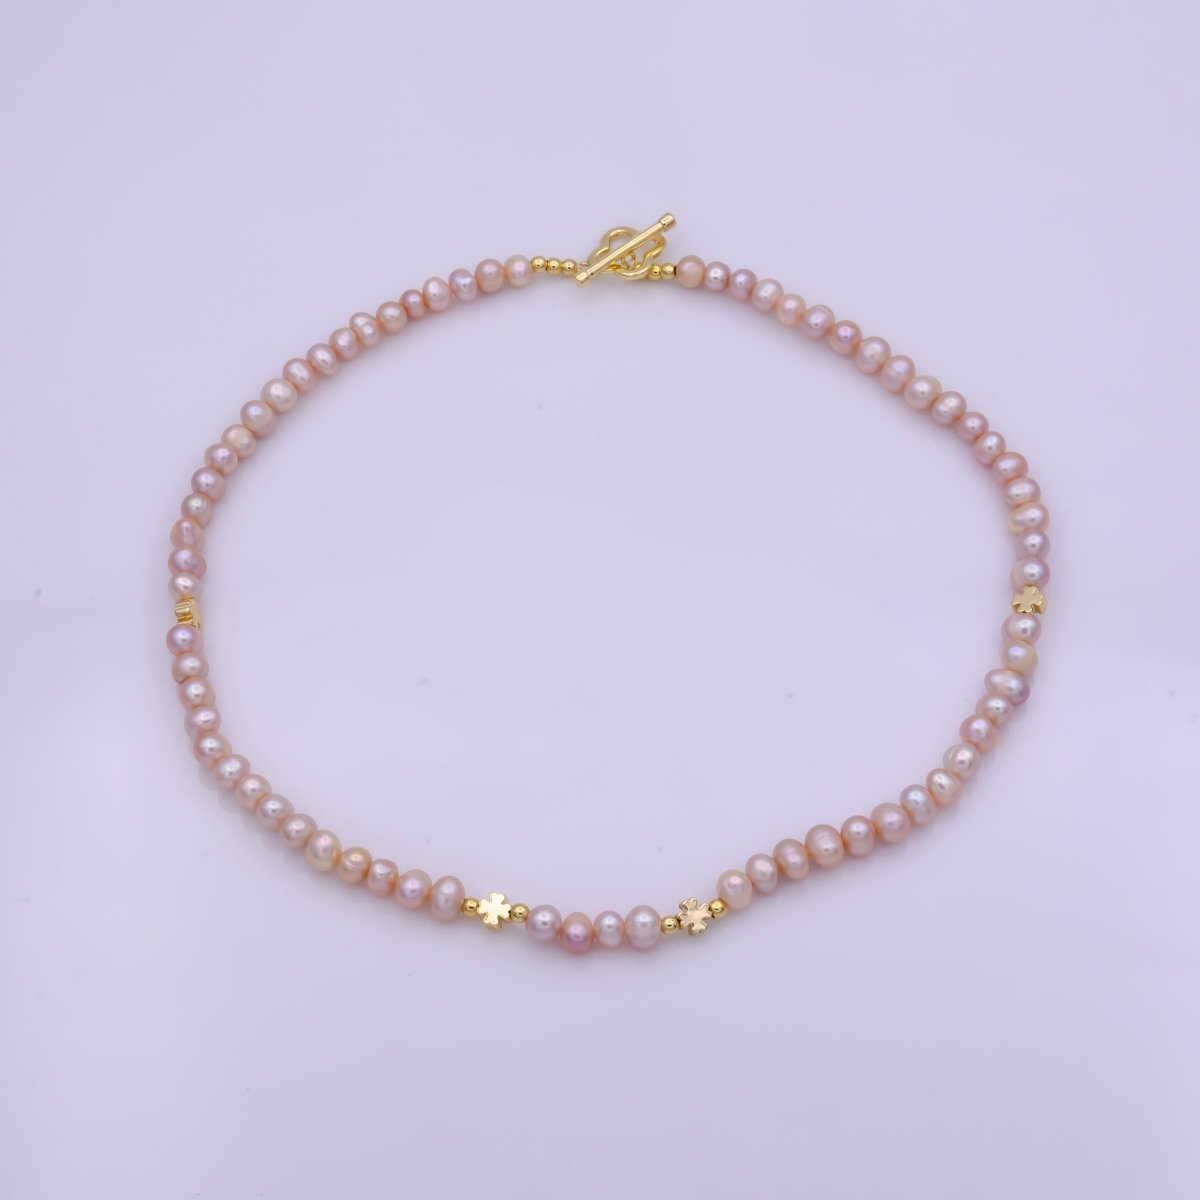 6mm Natural Pink Button Freshwater Pearl 16 Inch Handmade Choker Necklace w. Clover Toggle Clasps | WA-410 Clearance Pricing - DLUXCA